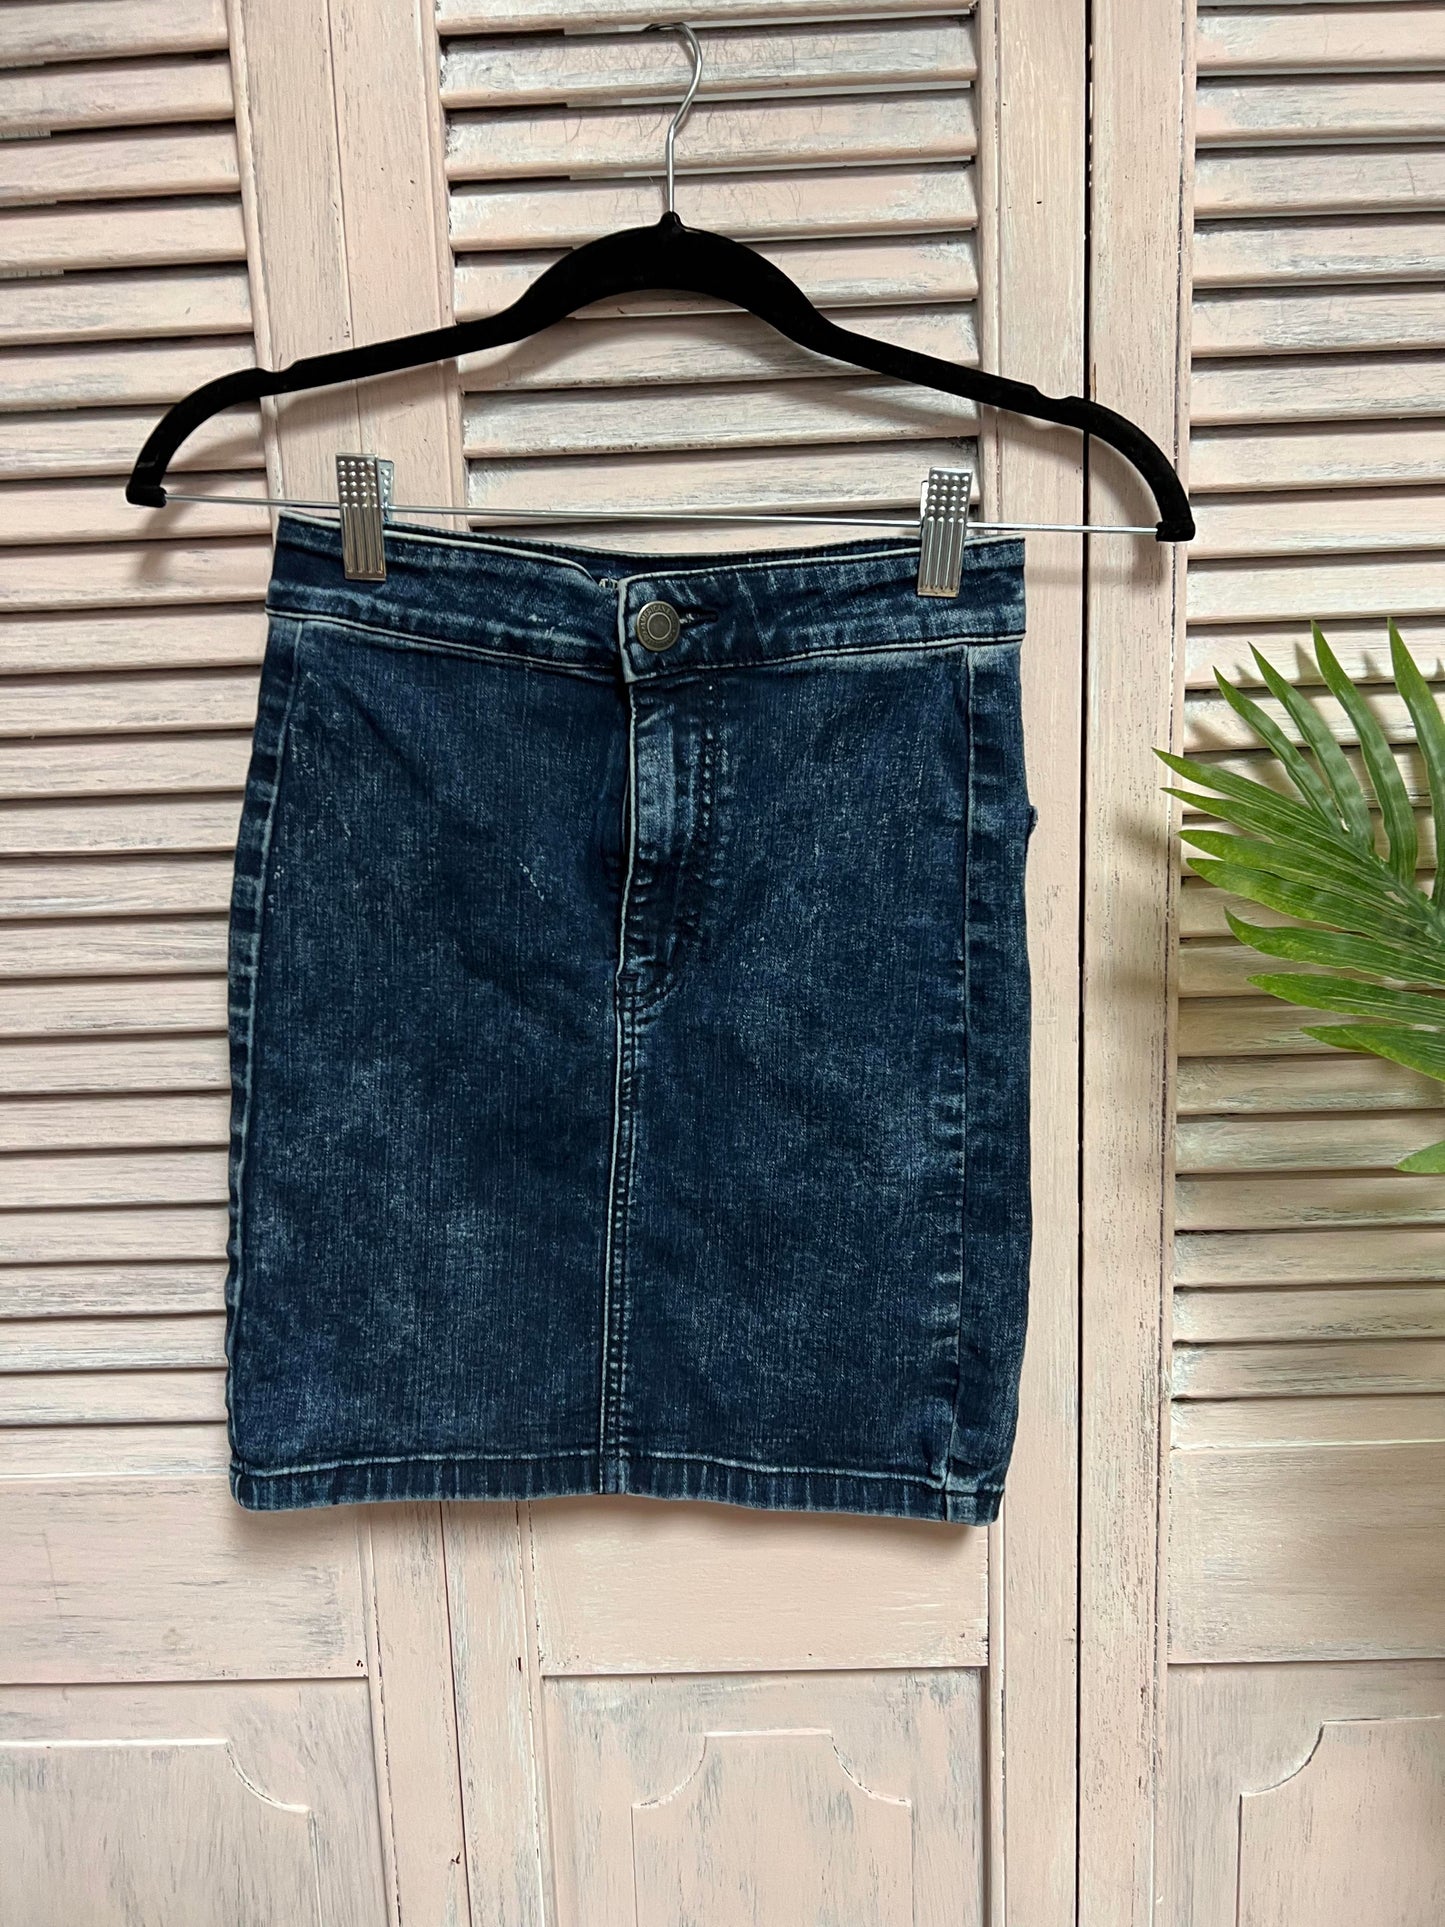 American Eagle Outfitters Jean Skirt